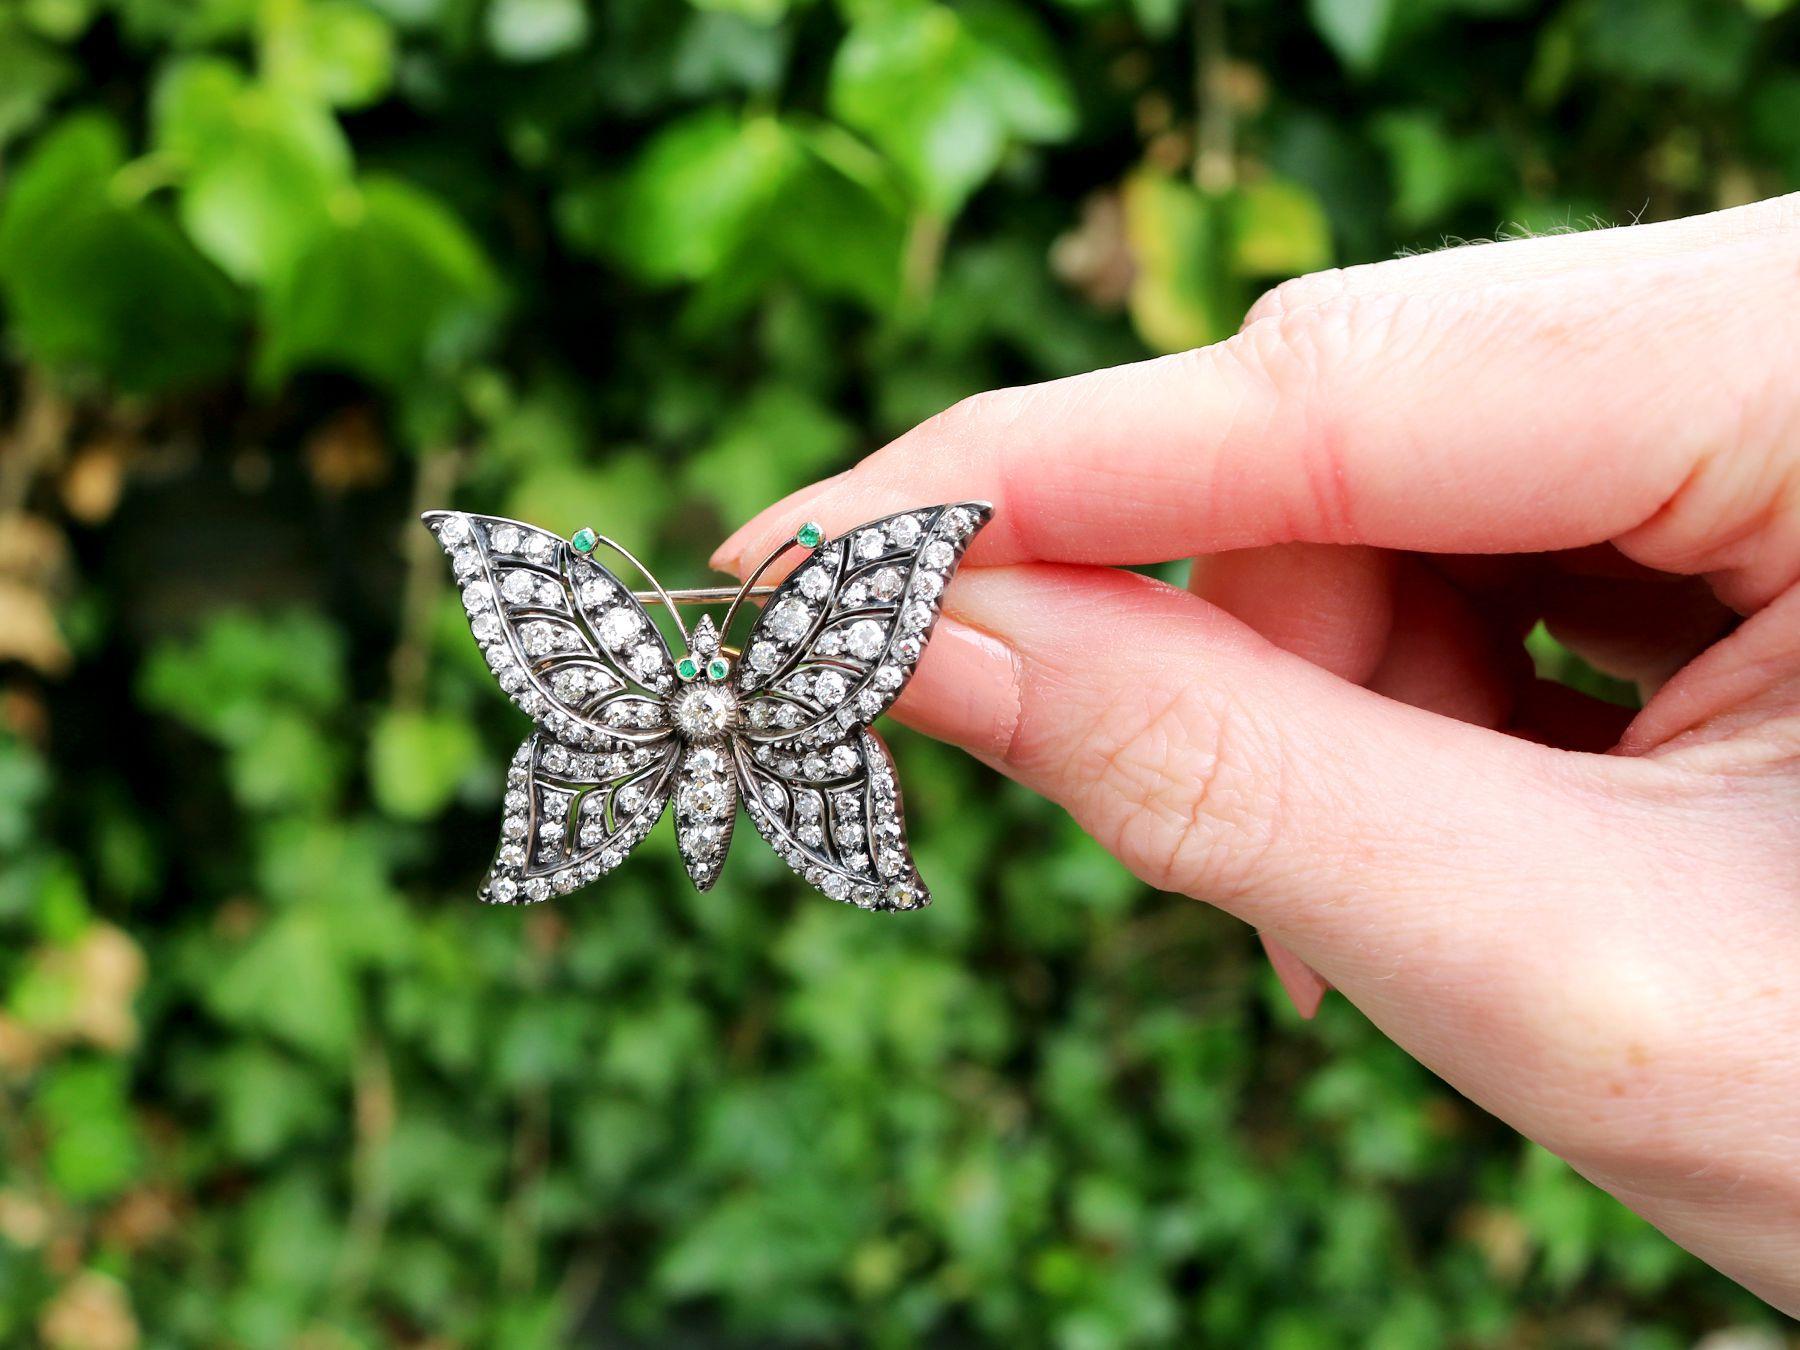 A stunning, fine and impressive antique 3.88 carat diamond and 0.04 carat emerald, 9 karat yellow gold and silver set butterfly brooch; part of our antique jewelry collections.

This stunning, fine and impressive antique brooch has been crafted in